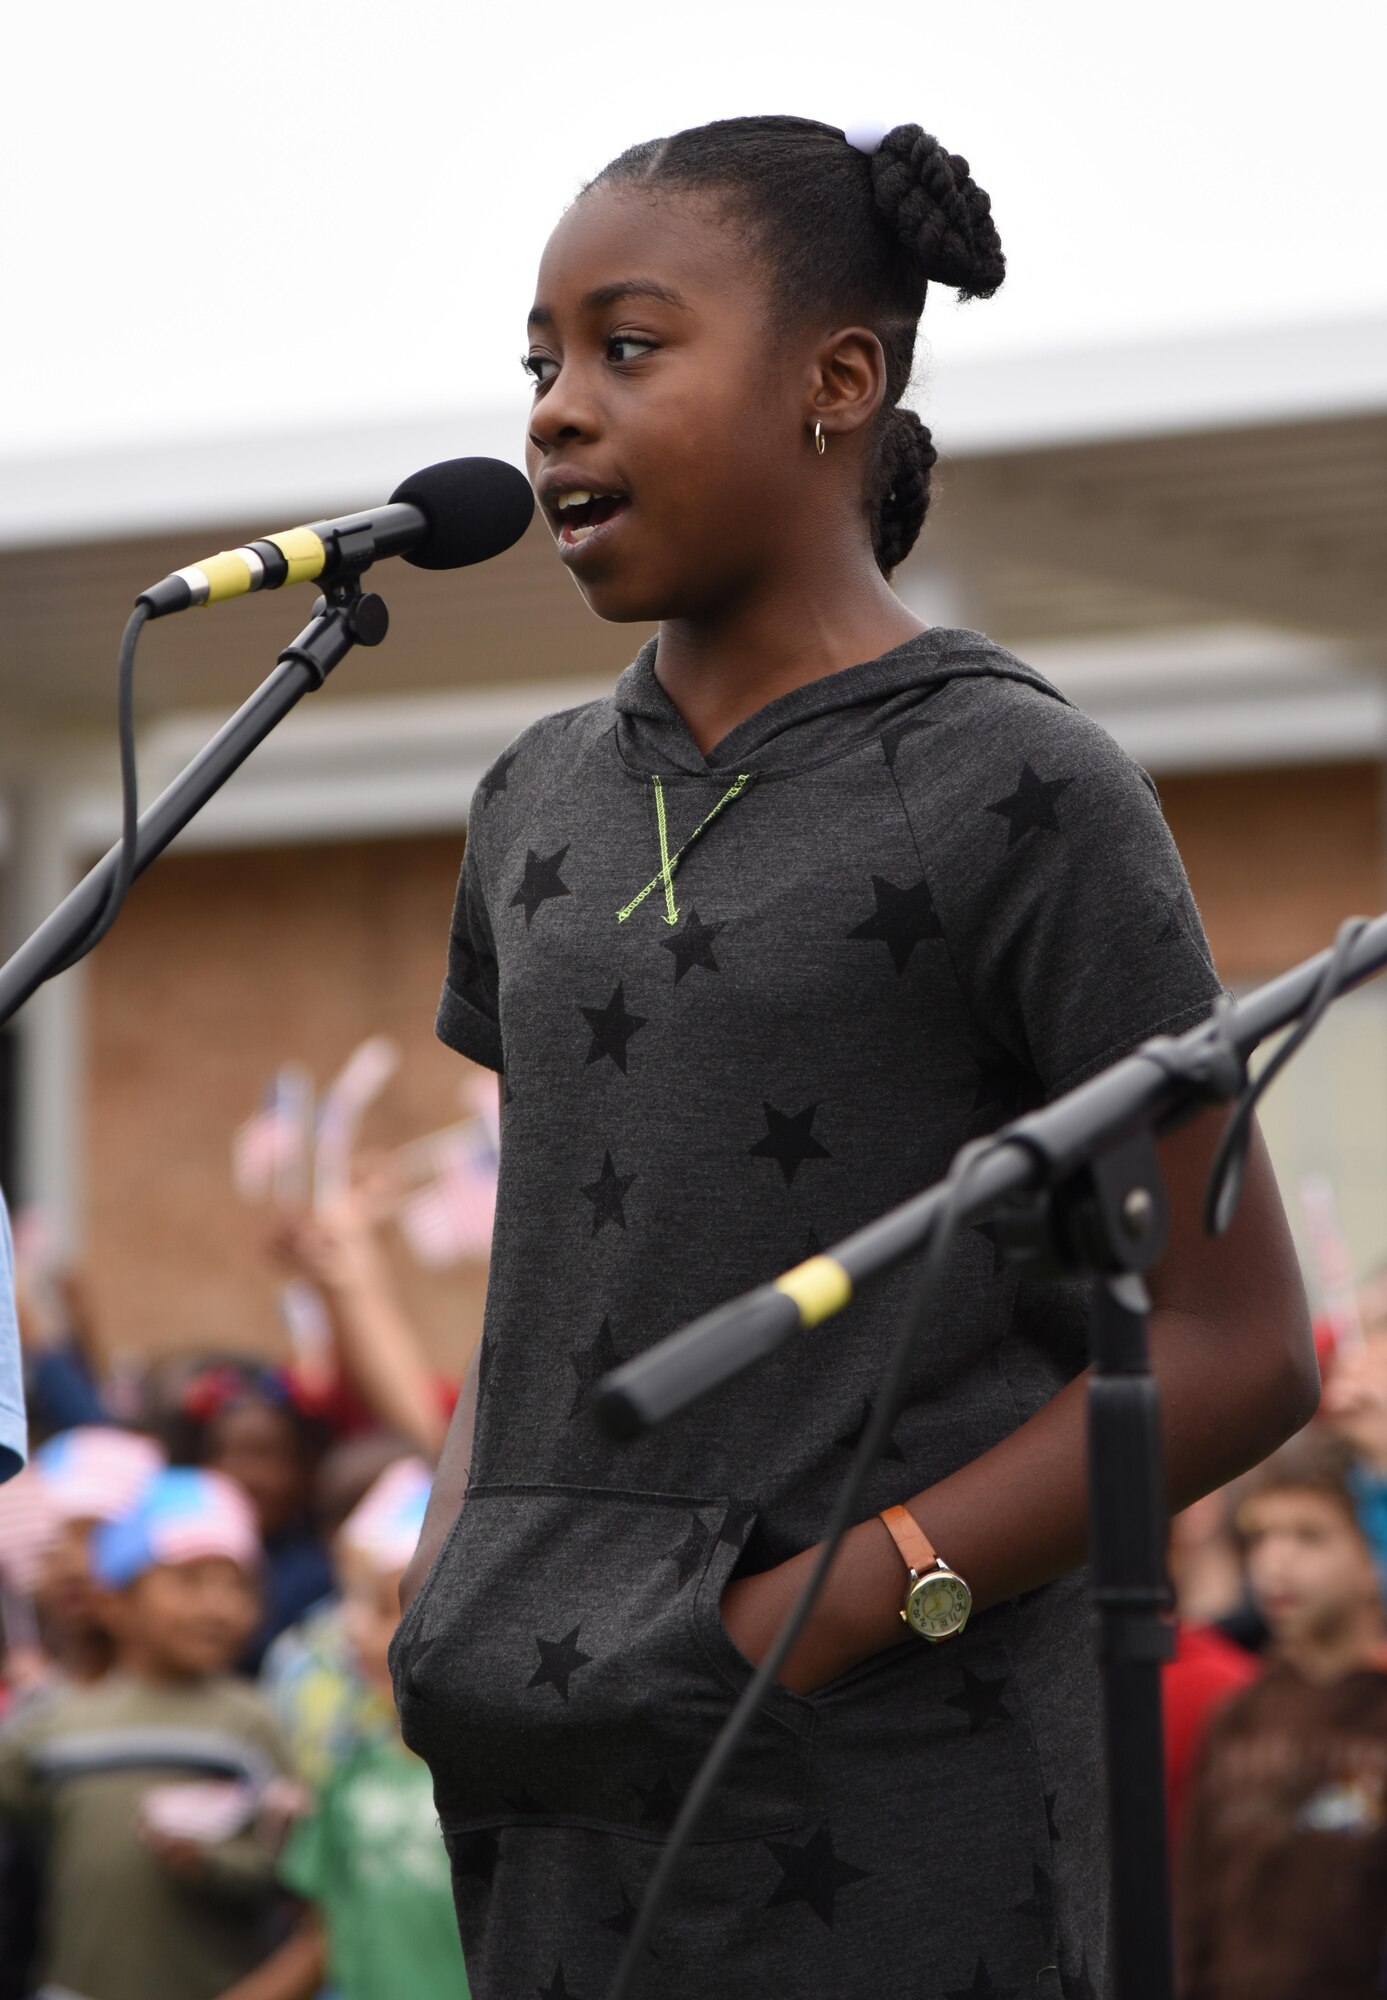 Aysiah Sims, daughter of Maj. Jahayra Lowe, 81st Comptroller Squadron commander, sings the “Allegiance Rap” song during a Jeff Davis Elementary School Veterans Day Celebration Nov. 11, 2016, in Biloxi, Miss. During the event, students delivered the Pledge of Allegiance and sang several patriotic songs. The Keesler Honor Guard and other service members also participated in the event. (U.S. Air Force photo by Kemberly Groue/Released)